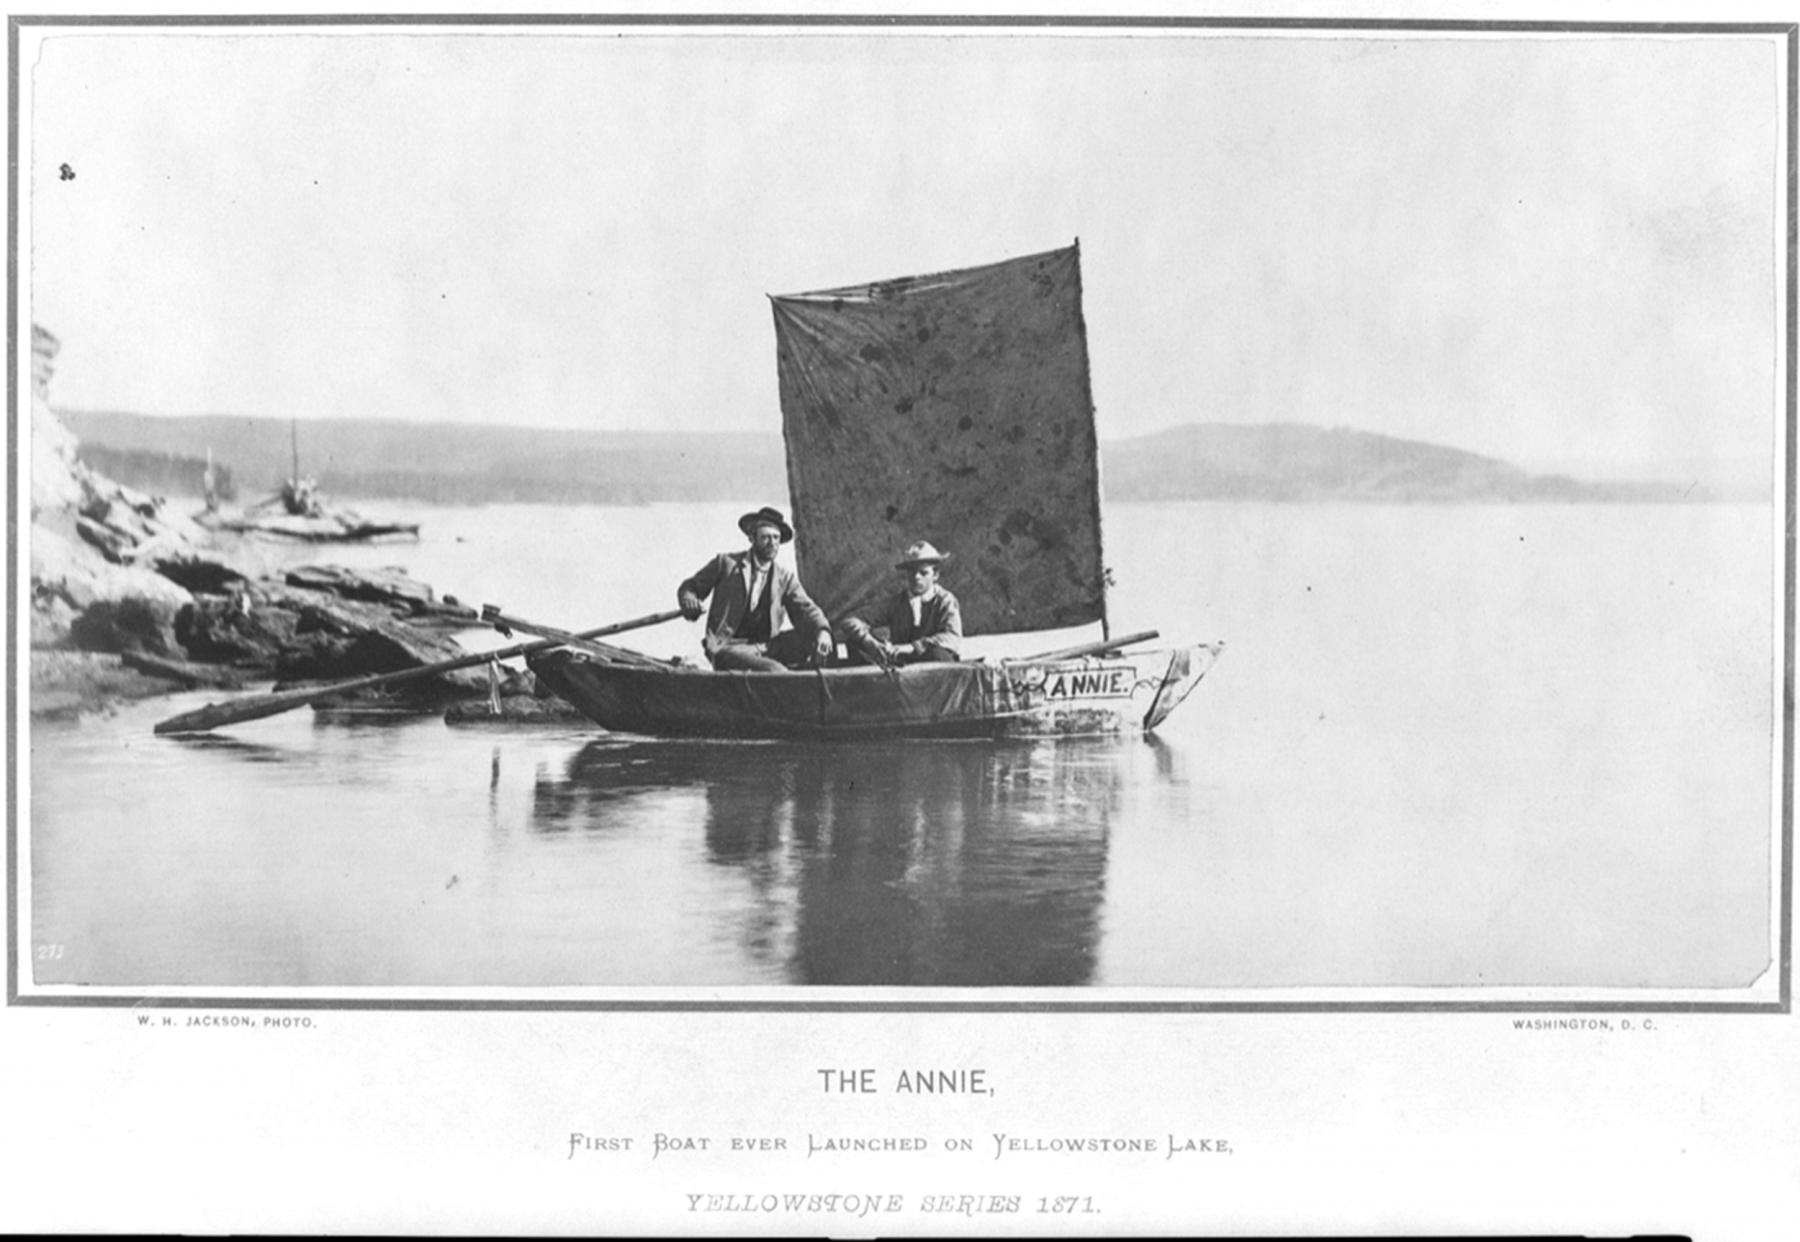 Hayden Expedition members Chester Dawes and Jim Stevenson in the Annie on Yellowstone Lake. The boat was packed in pieces on mules, reassembled and covered in heavy canvas when the expedition reached the lake. Oars were fashioned from timber on site. William Henry Jackson photo, 1871, Library of Congress.